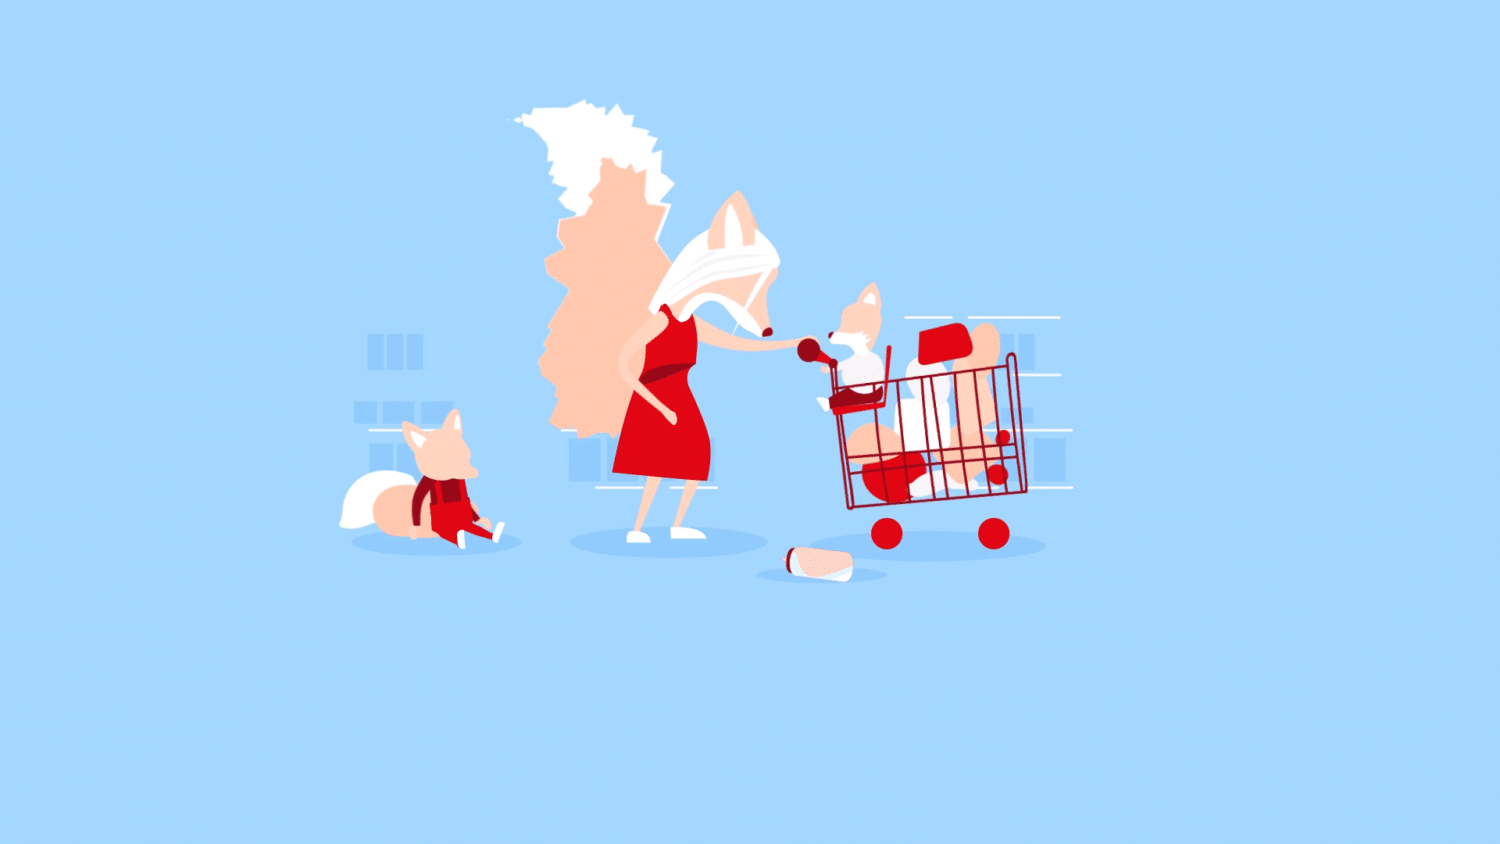 Image of The Big Issue Foundation's #EasyGiving Campaign showing mother fox shopping with children